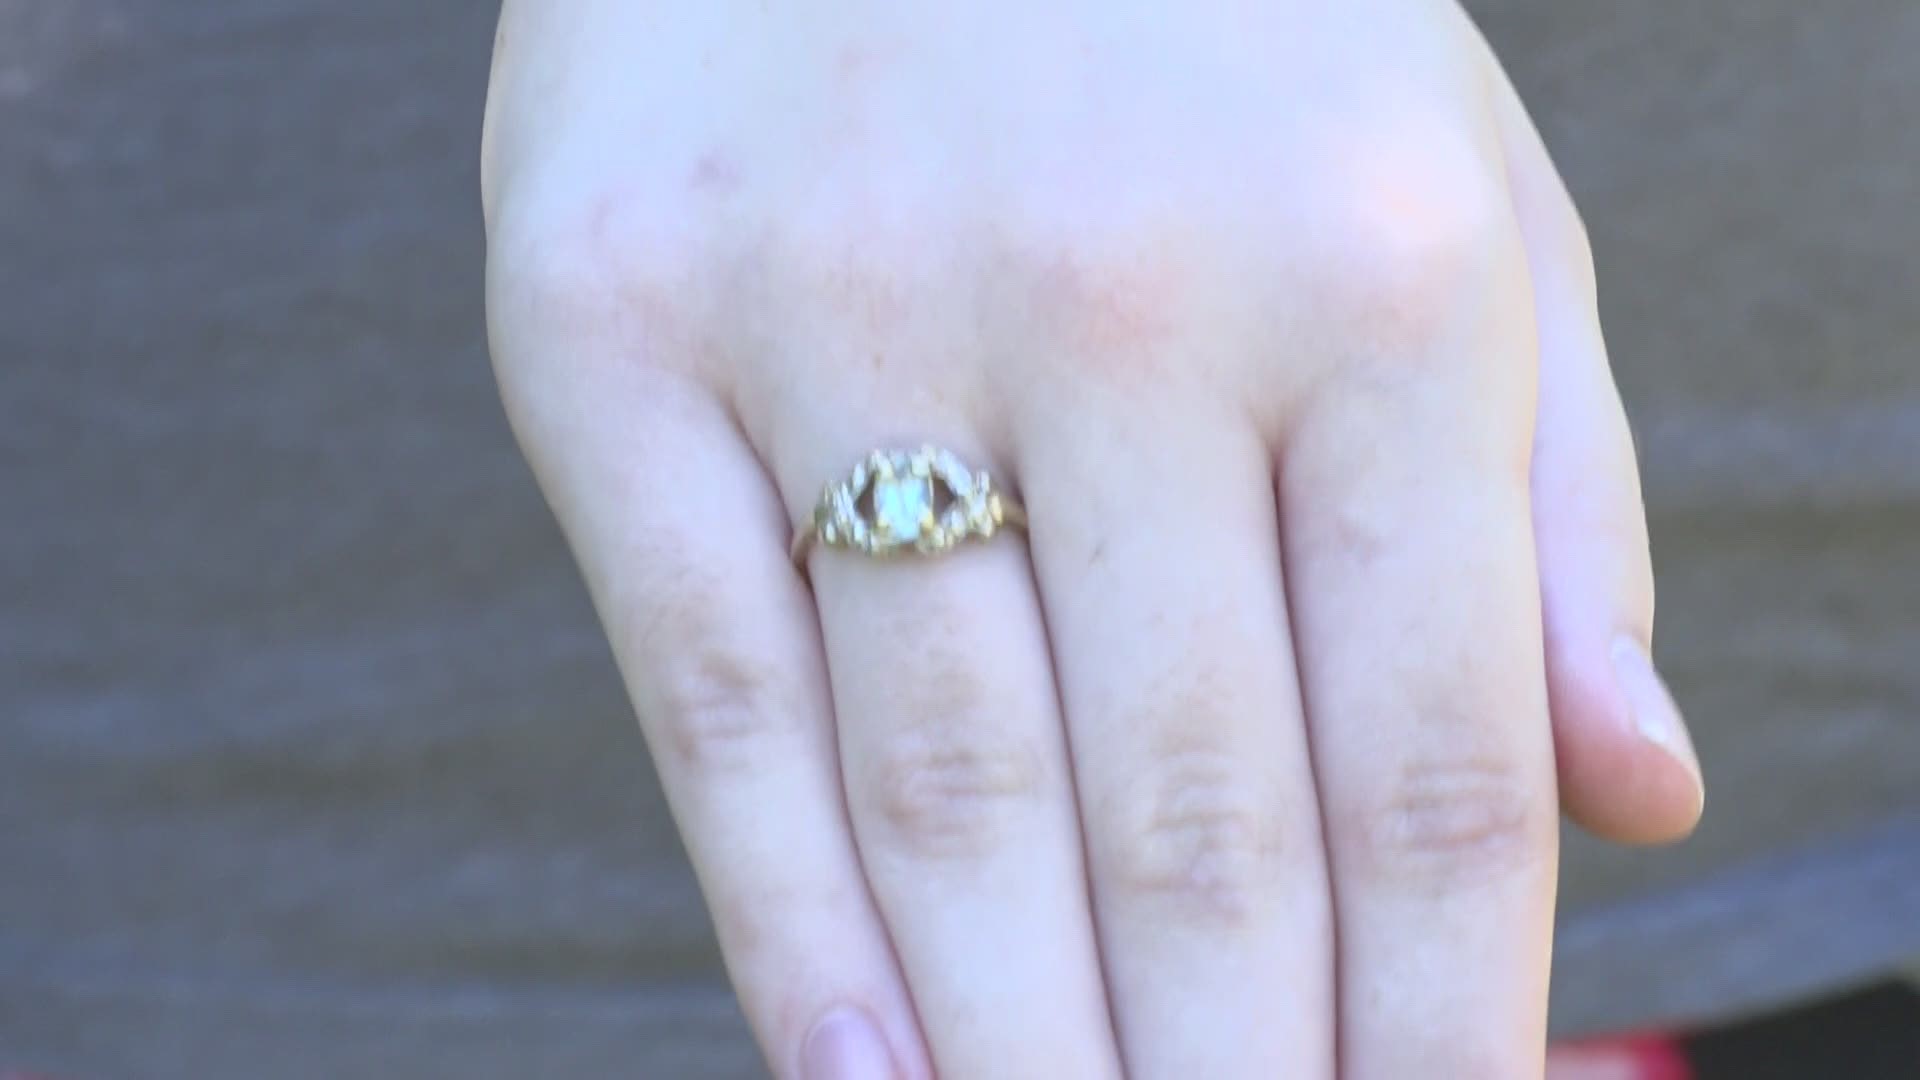 Lost ring found months later wrapped around garlic plant